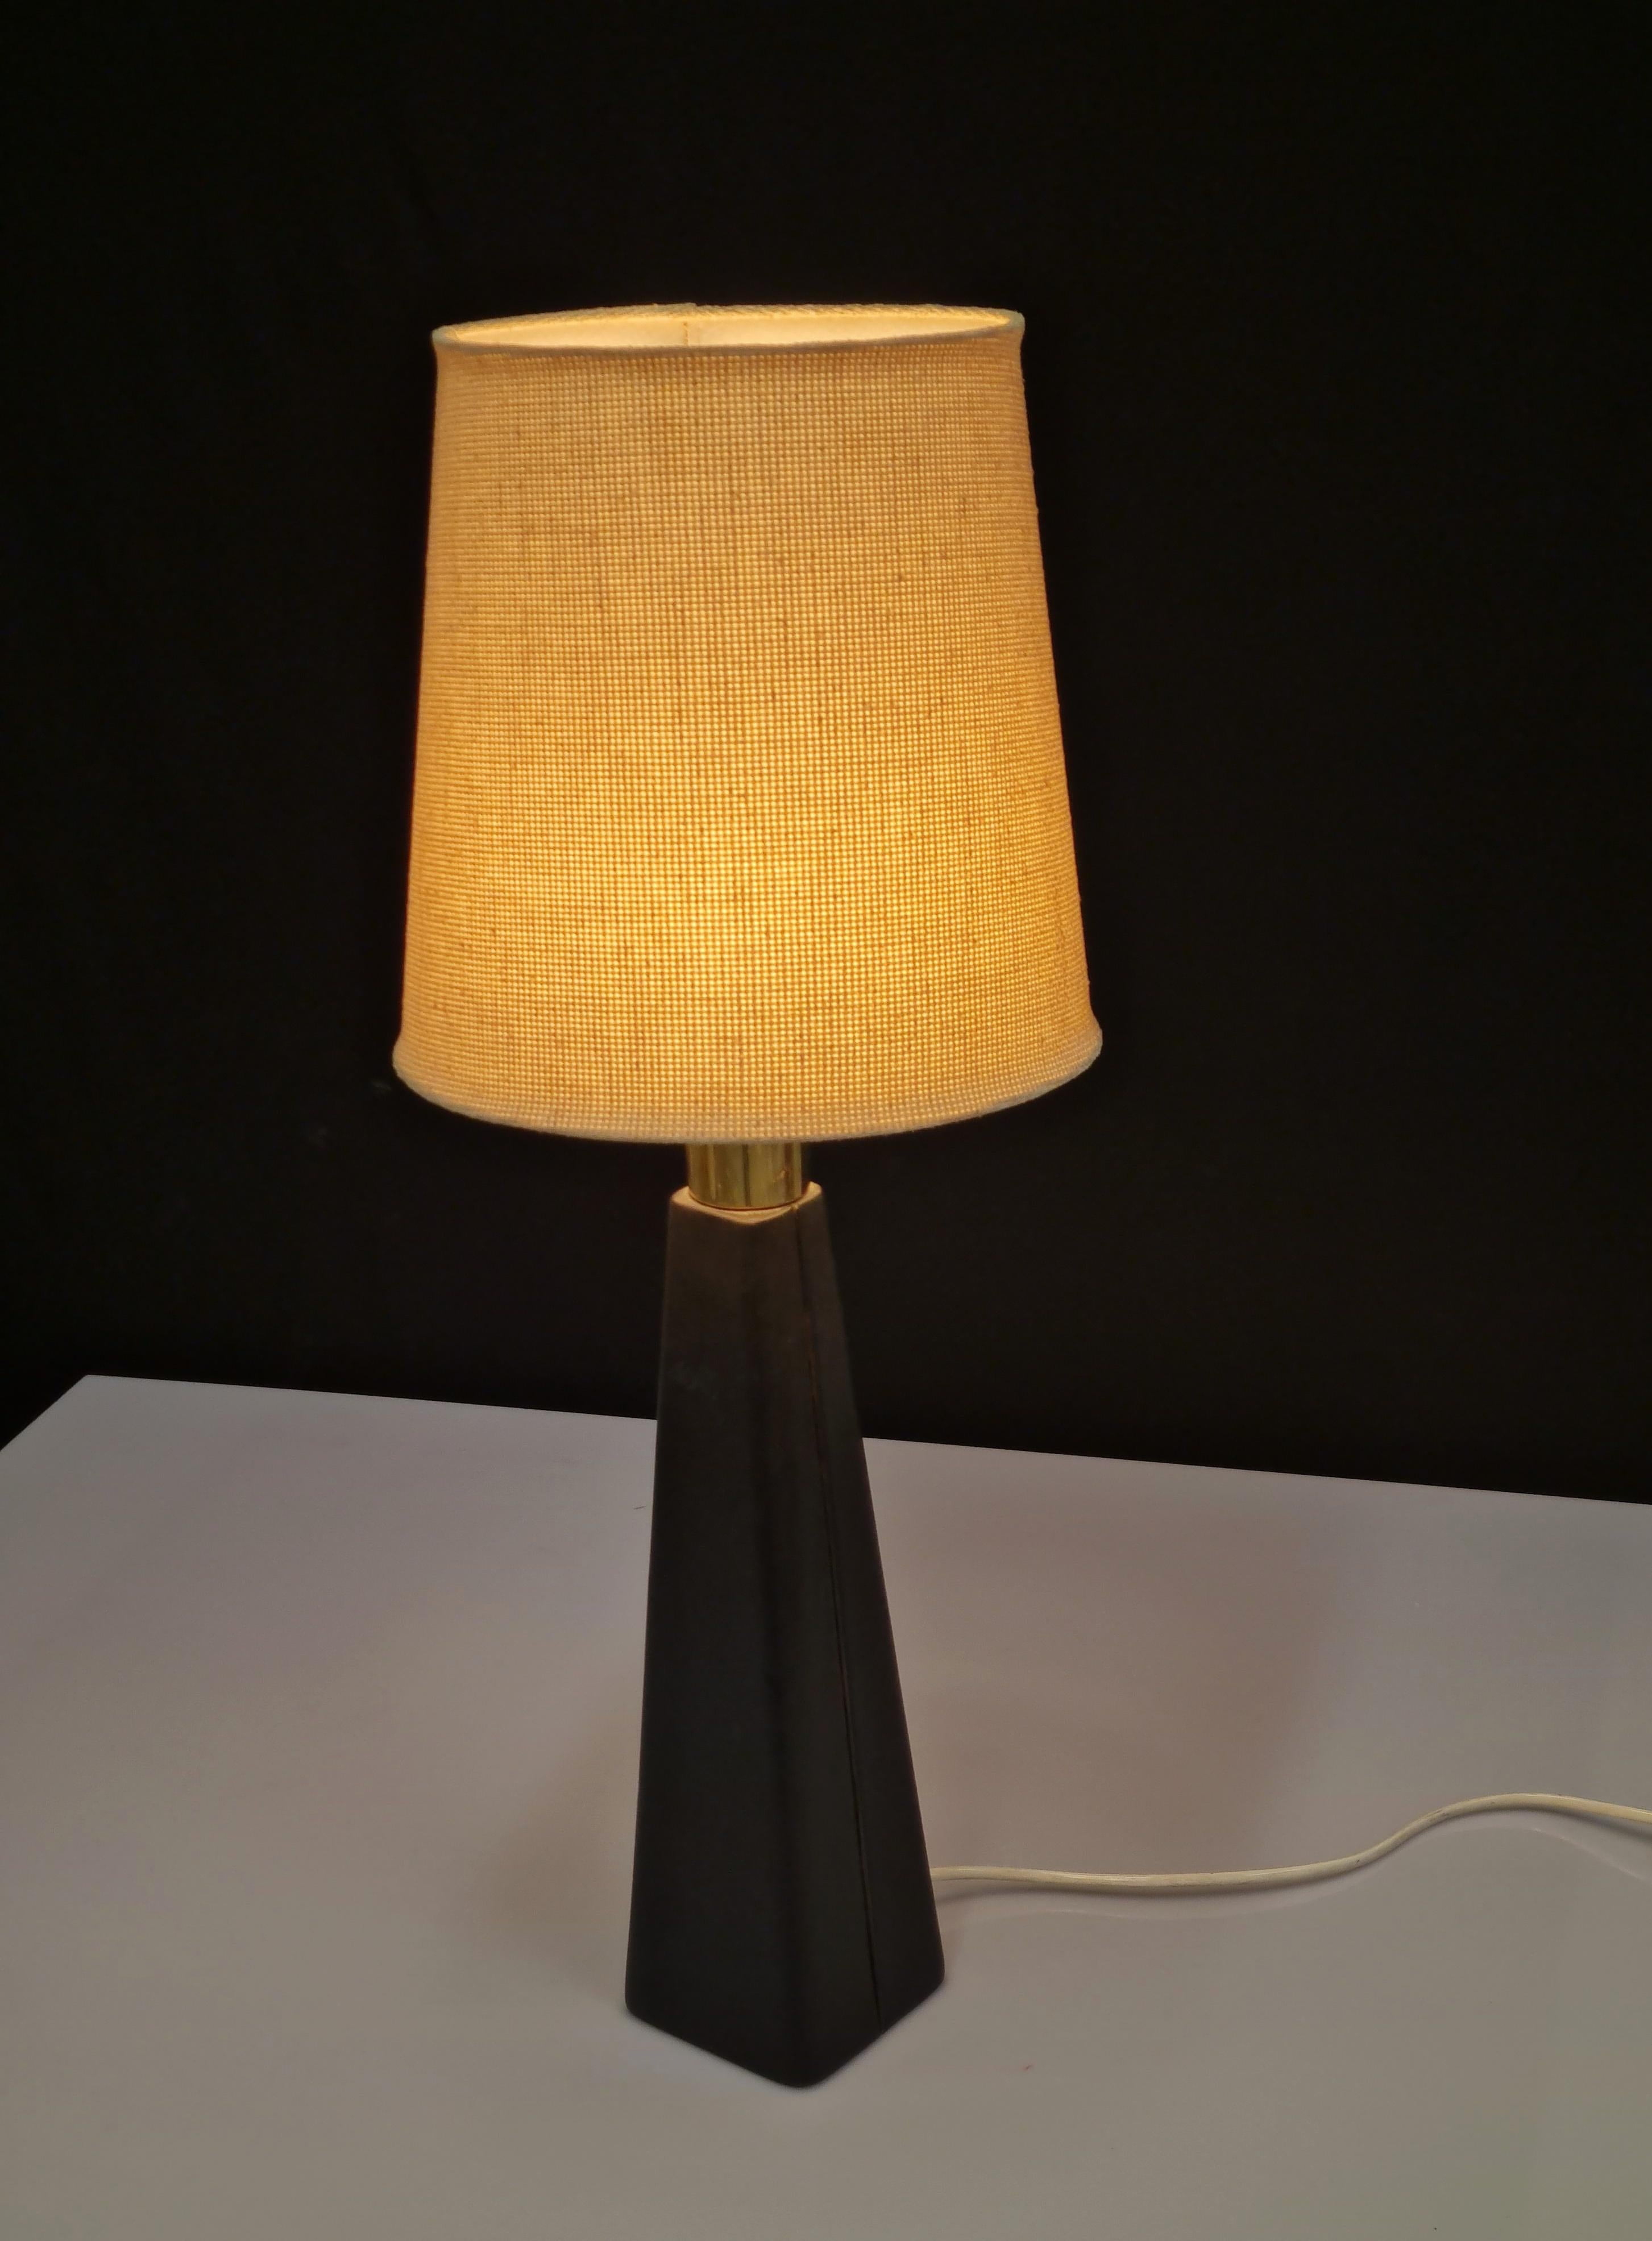 Lisa Johansson-Papé Table Lamp 46-186 LJP in Leather and Linen, Orno For Sale 1